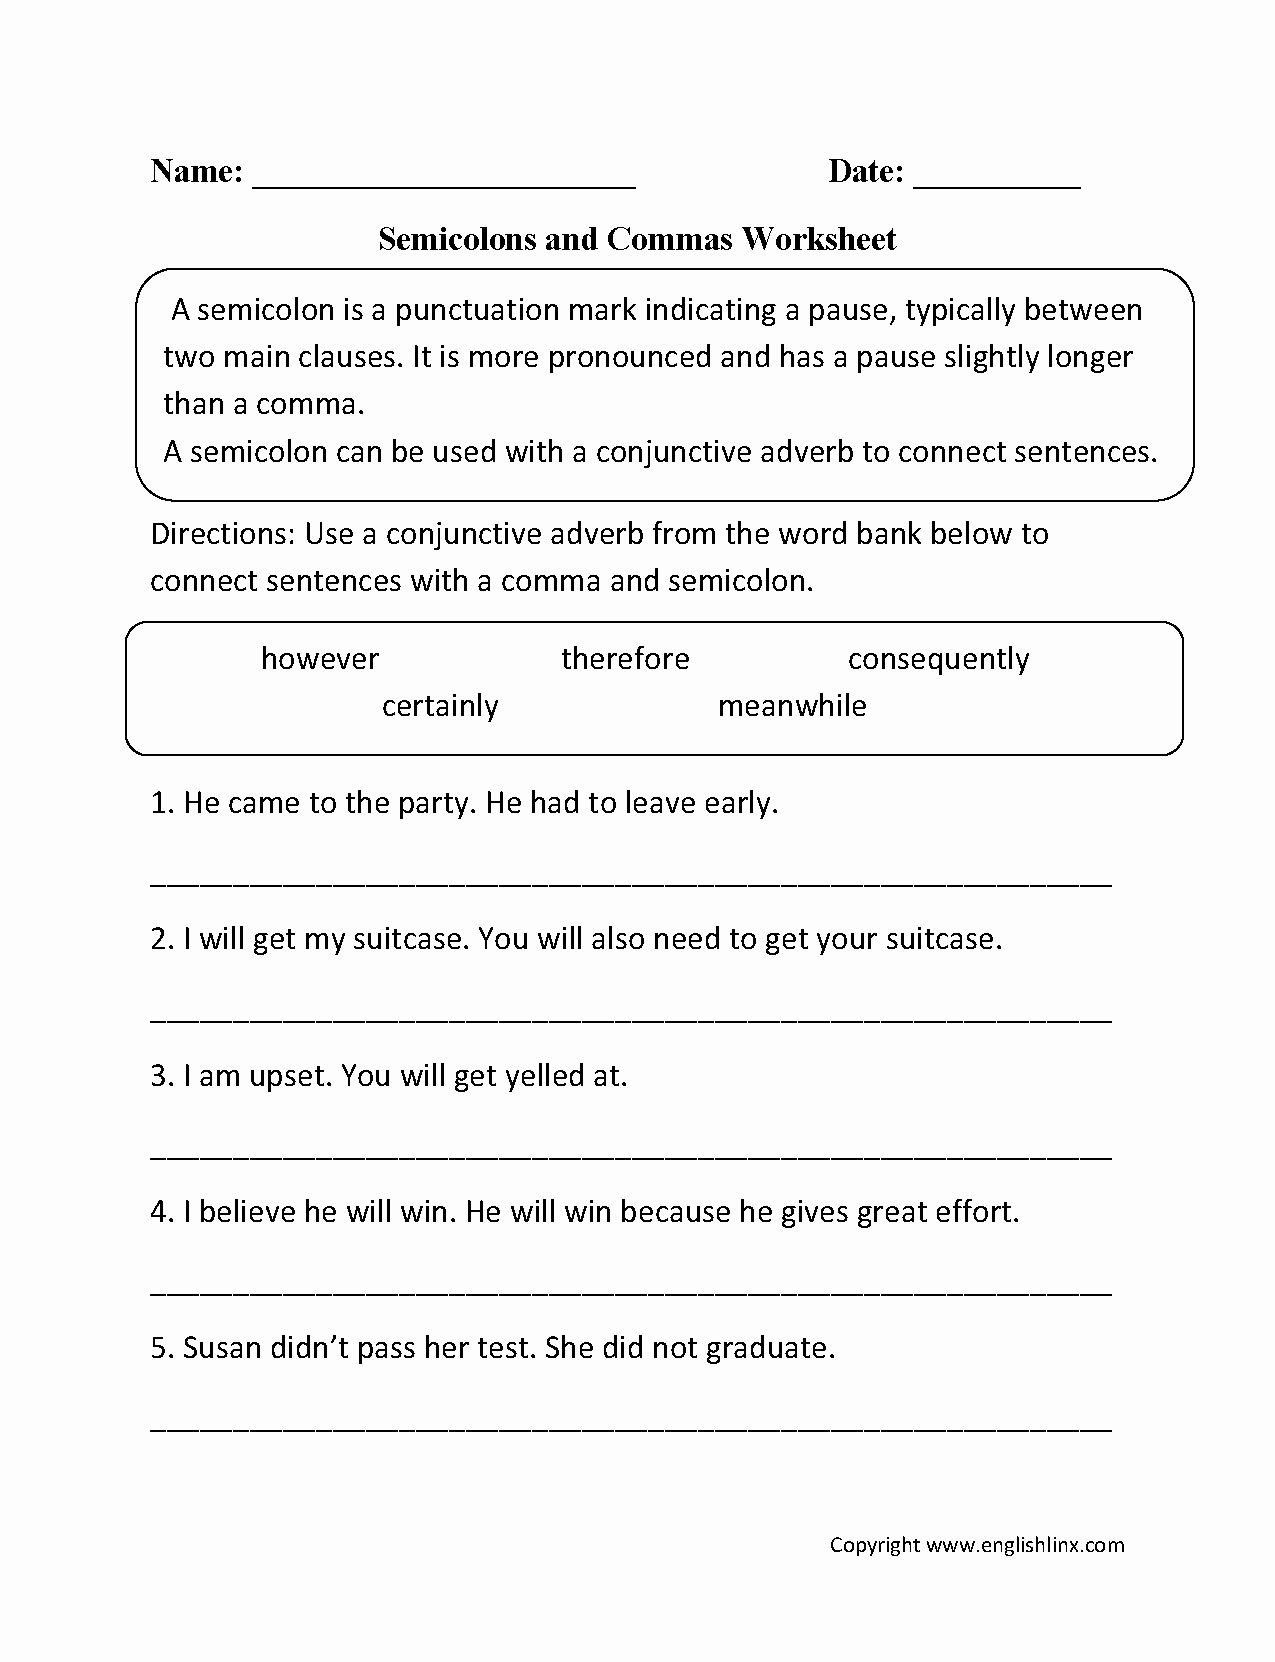 Semicolon and Colon Worksheet Awesome Semicolon Worksheets Englishlinx Board